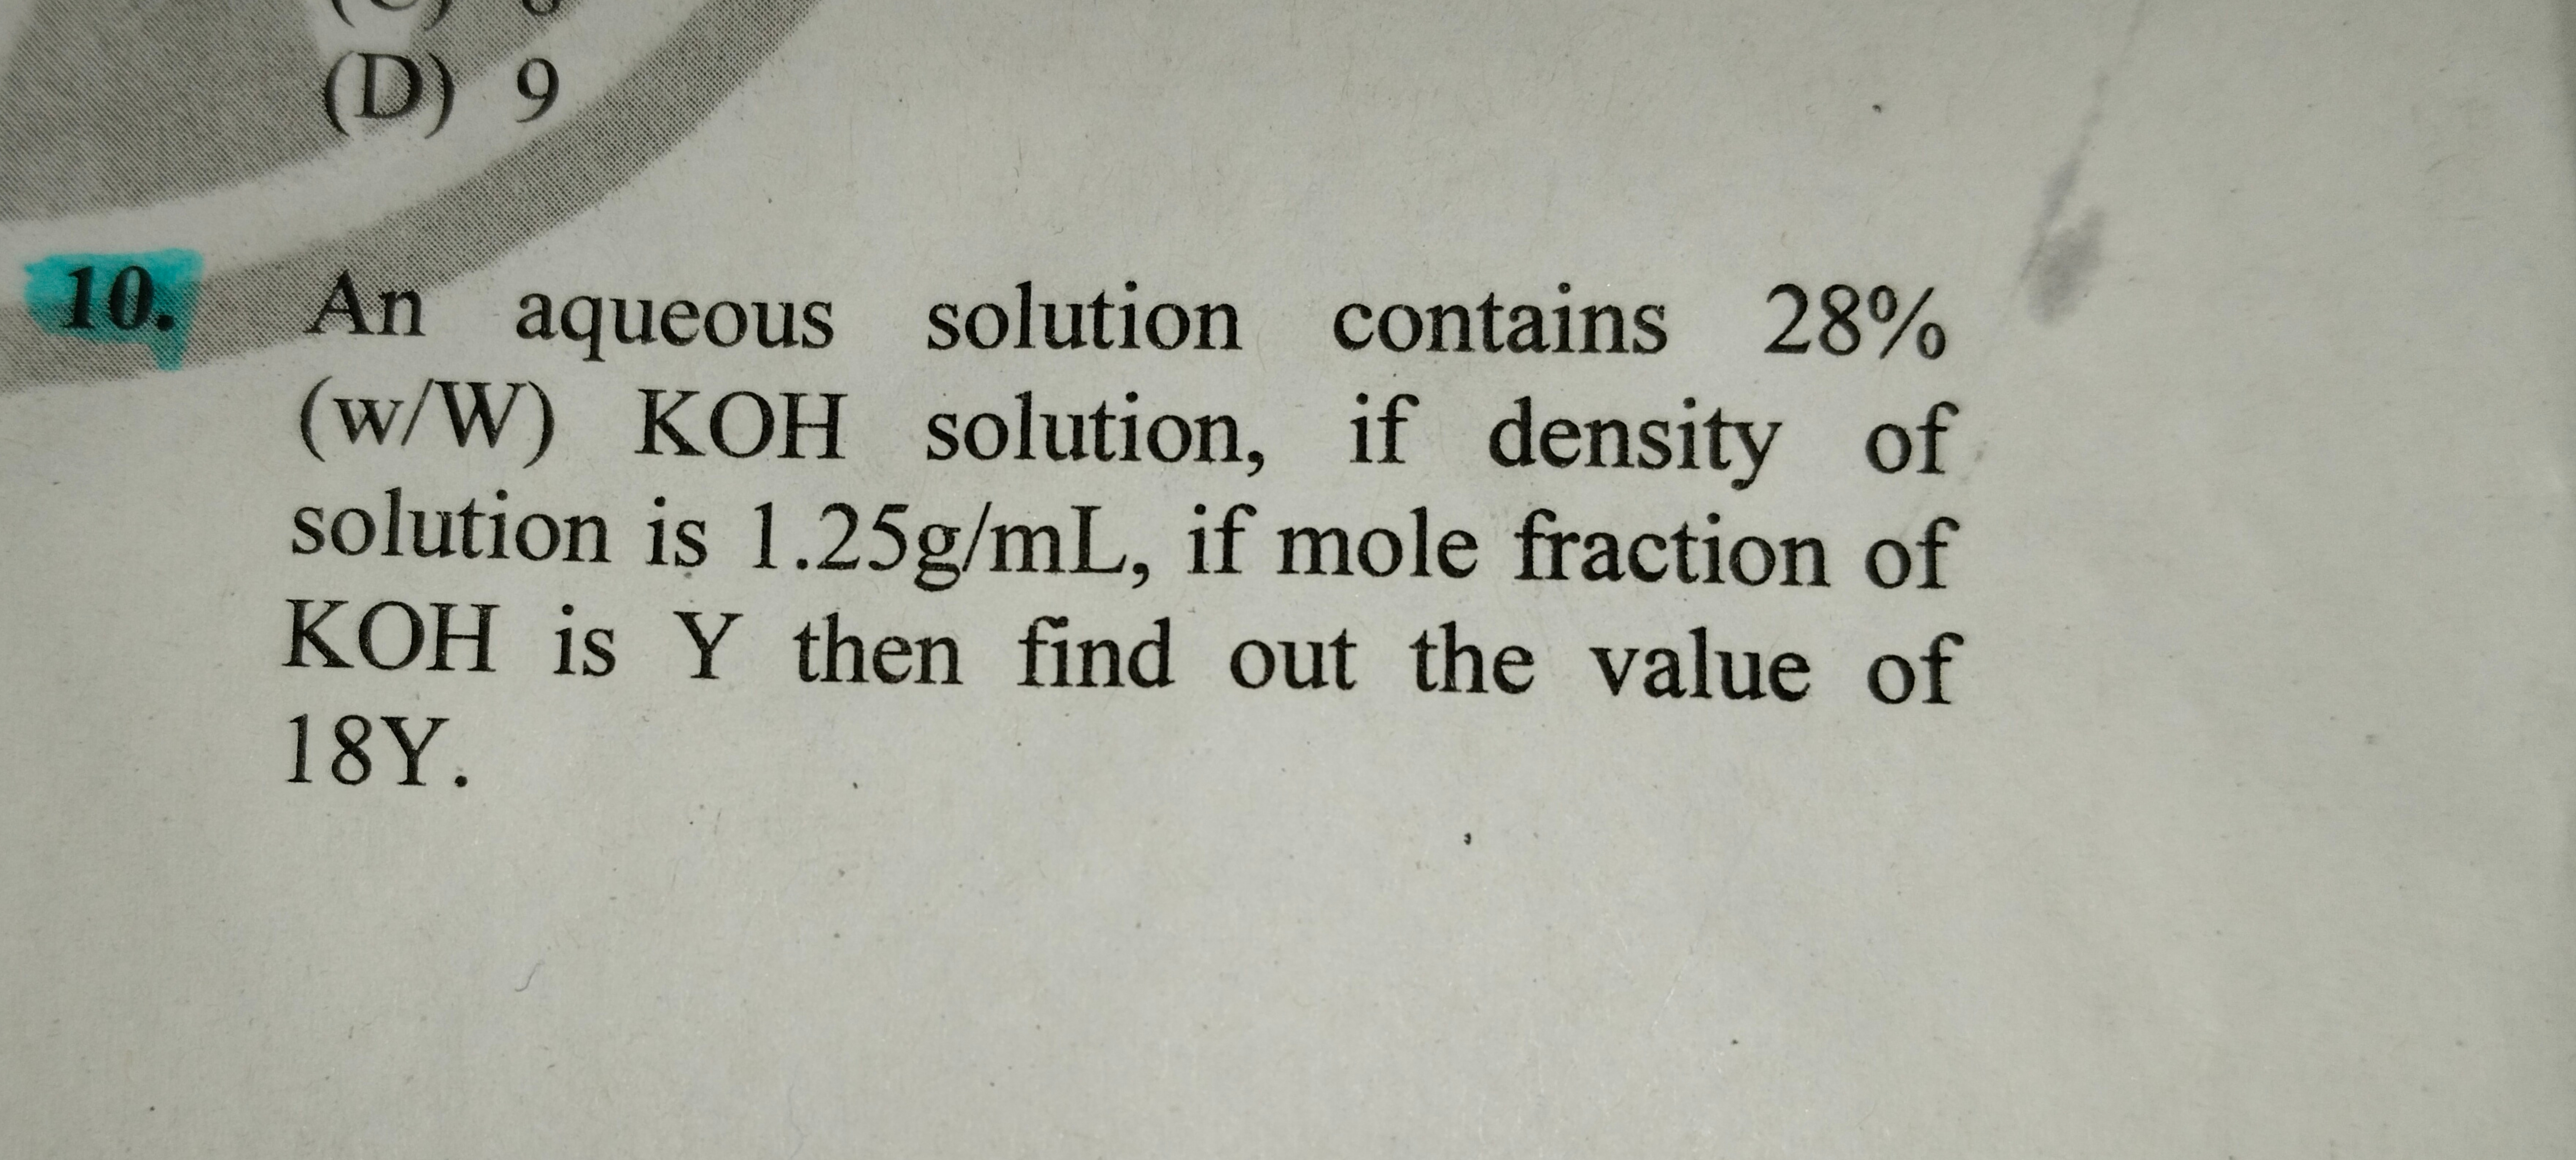 10. An aqueous solution contains 28% (w/W) KOH solution, if density of